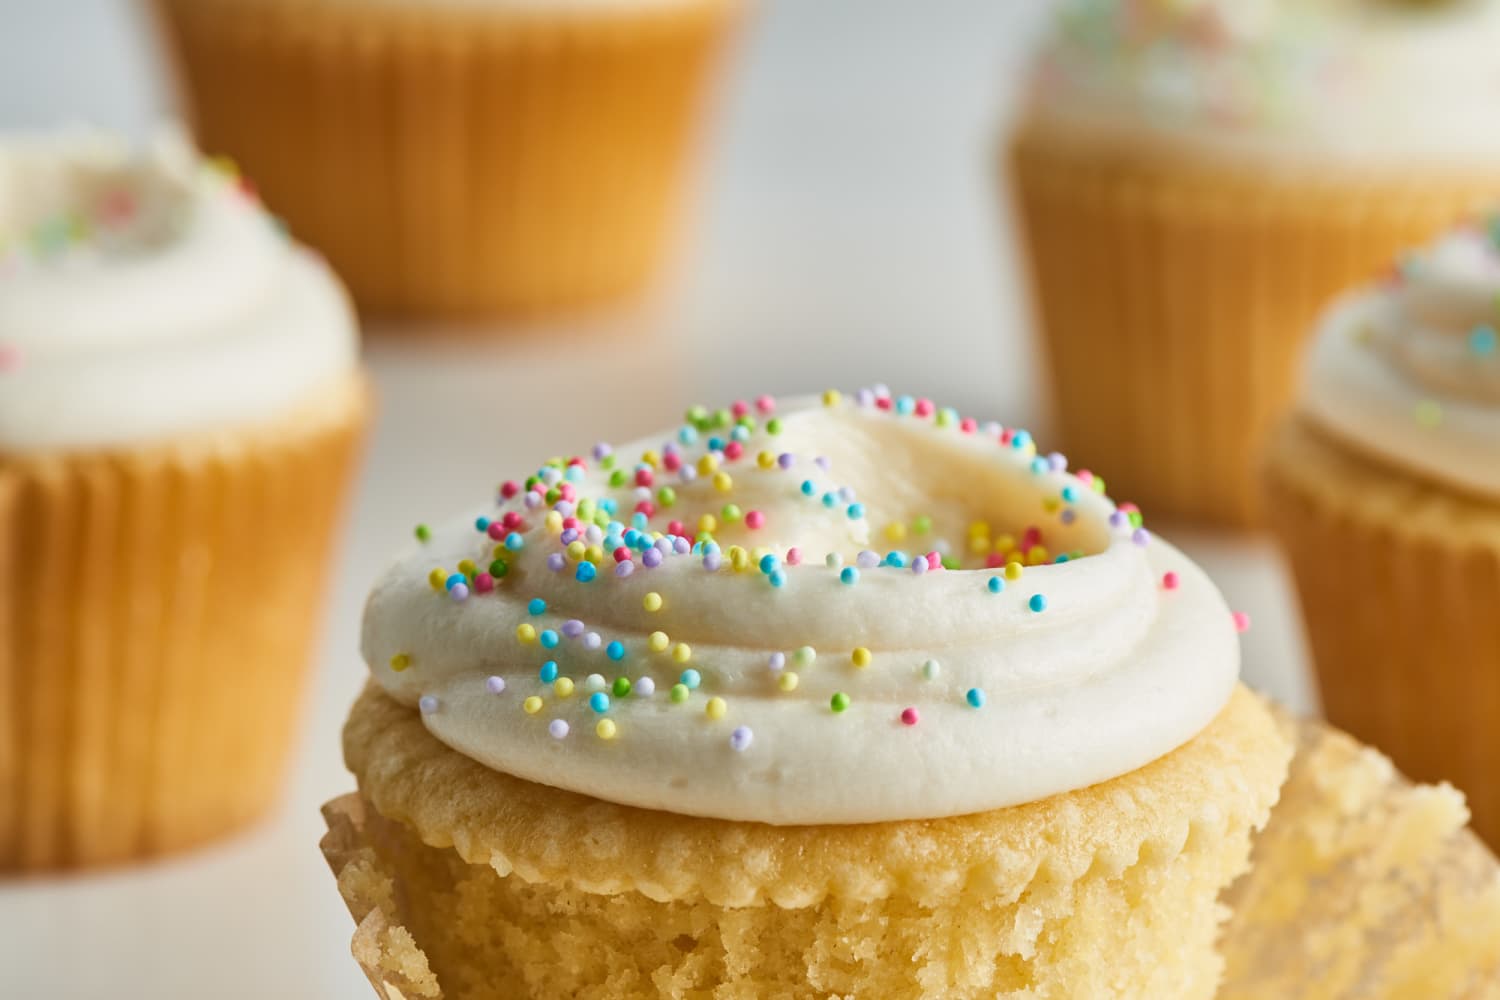 I Tried Magnolia Bakery’s Vanilla Cupcake Recipe, and Now I Understand the Hype